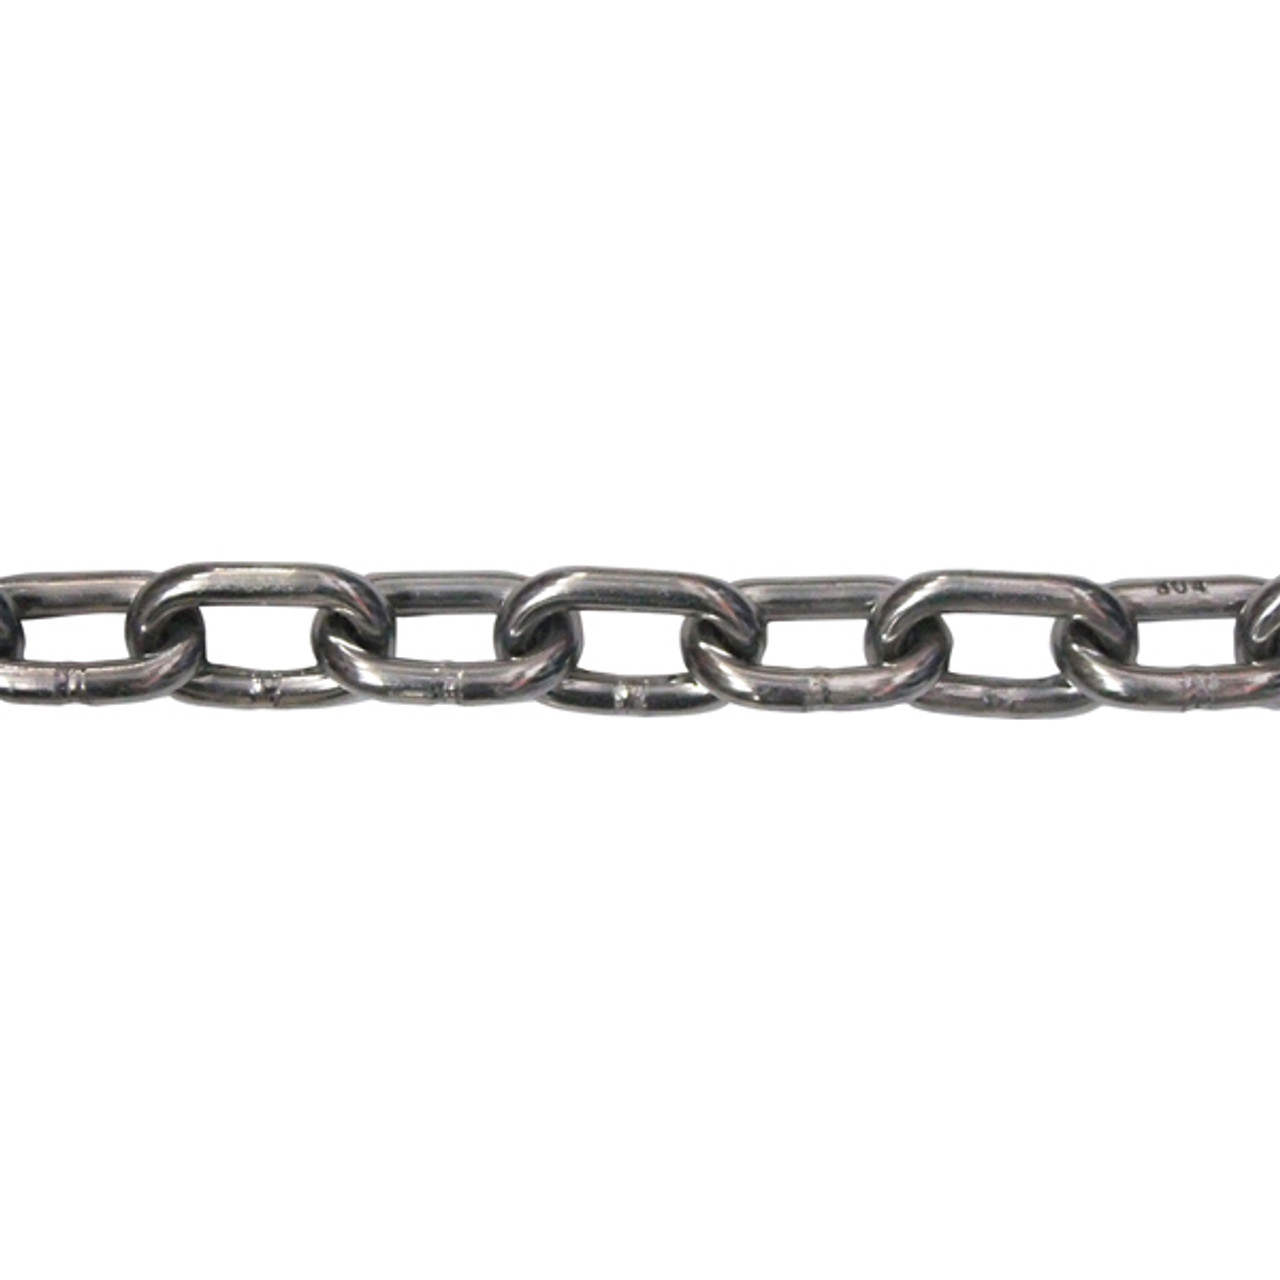 Short Link Stainless Steel Chain - 304 Grade | Boat Warehouse